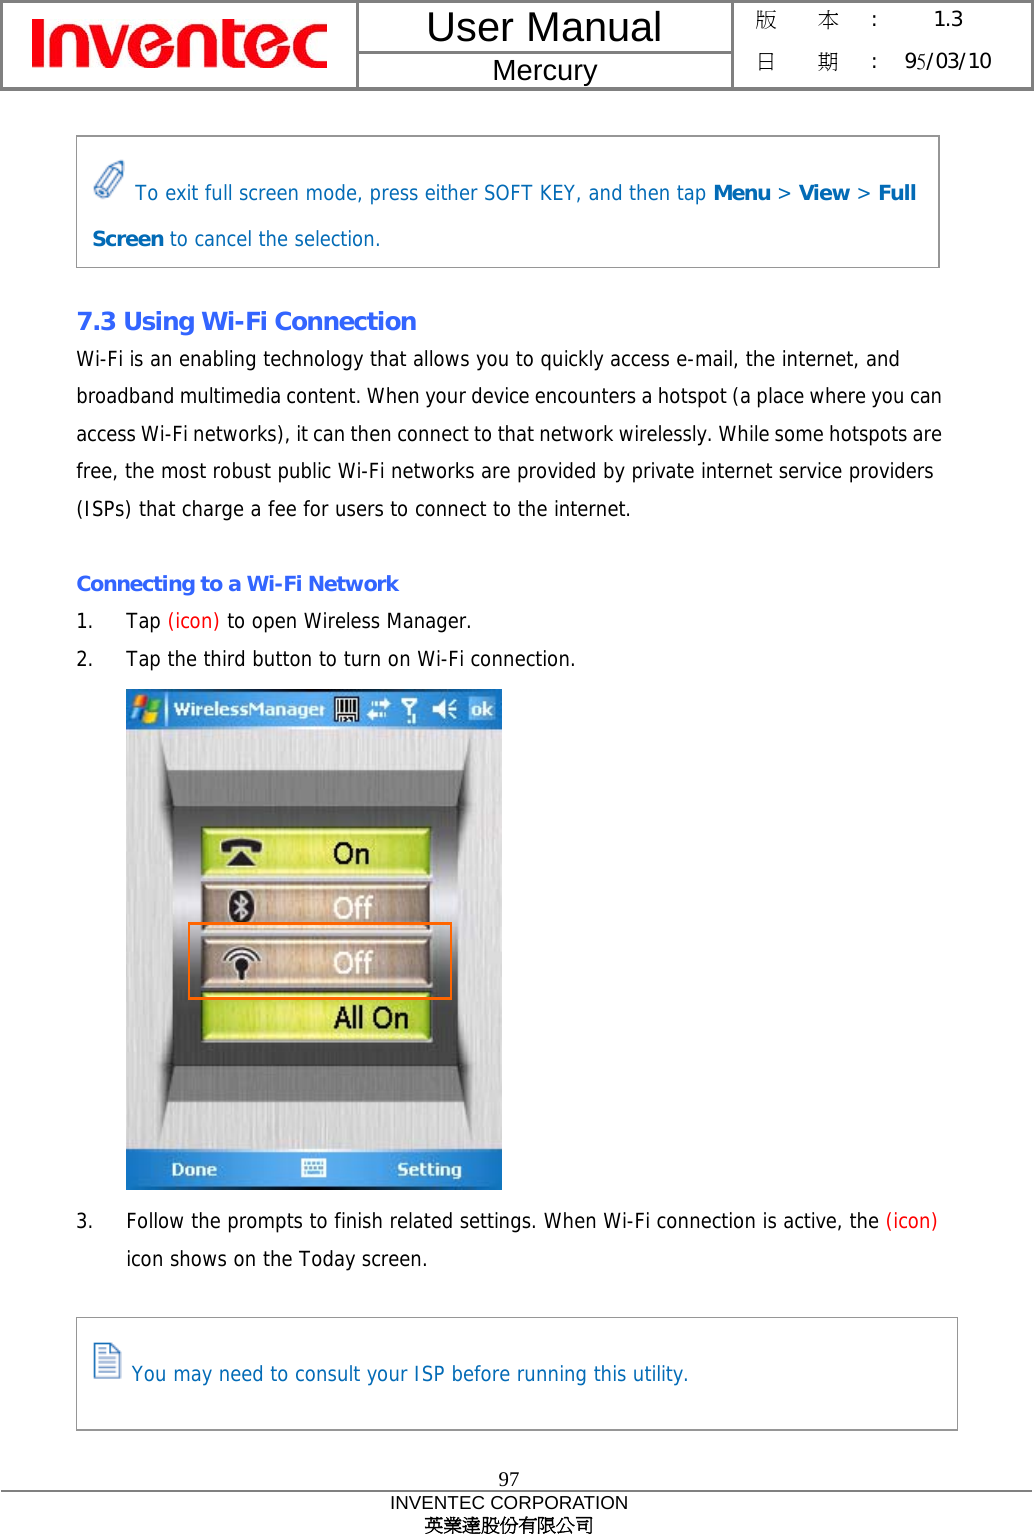 User Manual  Mercury 版    本 :  1.3 日    期 : 95/03/10  97 INVENTEC CORPORATION 英業達股份有限公司       7.3 Using Wi-Fi Connection Wi-Fi is an enabling technology that allows you to quickly access e-mail, the internet, and broadband multimedia content. When your device encounters a hotspot (a place where you can access Wi-Fi networks), it can then connect to that network wirelessly. While some hotspots are free, the most robust public Wi-Fi networks are provided by private internet service providers (ISPs) that charge a fee for users to connect to the internet.  Connecting to a Wi-Fi Network 1. Tap (icon) to open Wireless Manager. 2.  Tap the third button to turn on Wi-Fi connection.  3.  Follow the prompts to finish related settings. When Wi-Fi connection is active, the (icon) icon shows on the Today screen.  To exit full screen mode, press either SOFT KEY, and then tap Menu &gt; View &gt; Full Screen to cancel the selection.  You may need to consult your ISP before running this utility. 